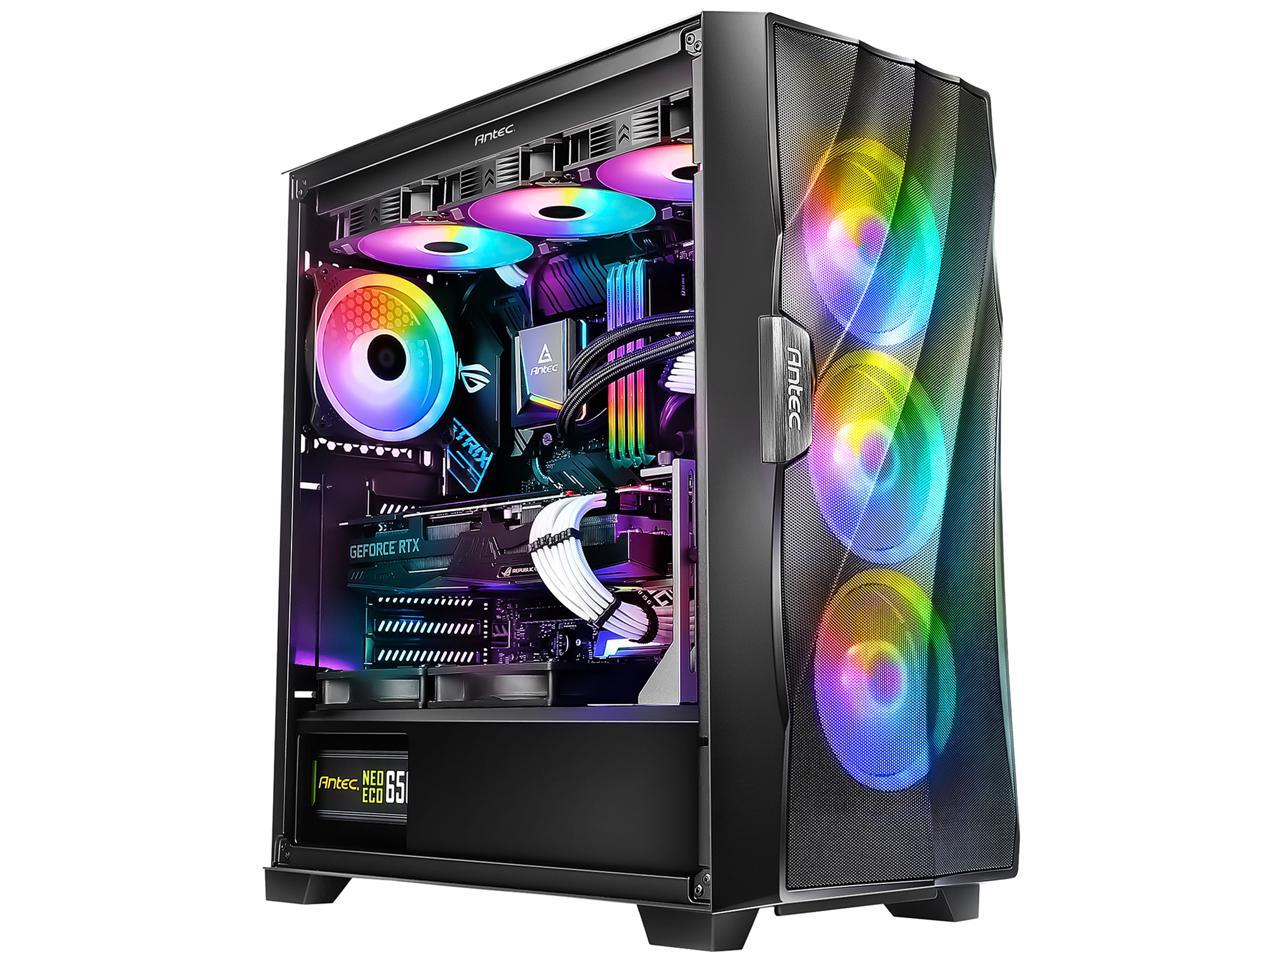 Black USB3.0 x 2 Mid Tower Computer Case 360 mm Radiator Support Tempered Glass Side Panel Antec DF700 RF ATX Gaming Case 